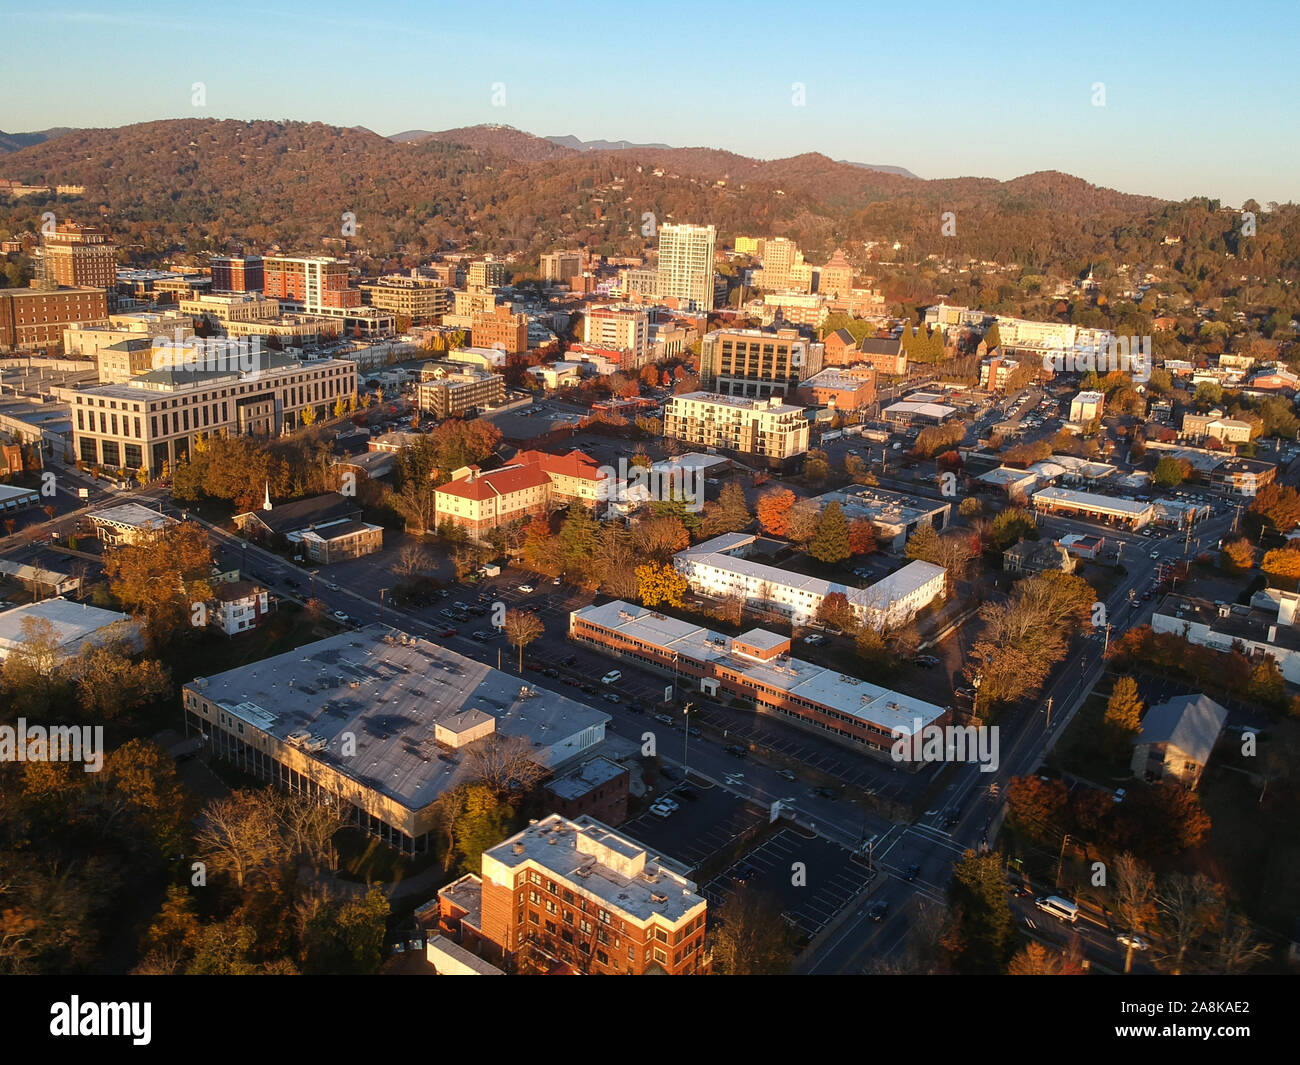 Downtown Asheville, North Carolina. Aerial drone view of the city in the Blue Ridge Mountains during Autumn / Fall Season. Architecture, Buildings, Stock Photo